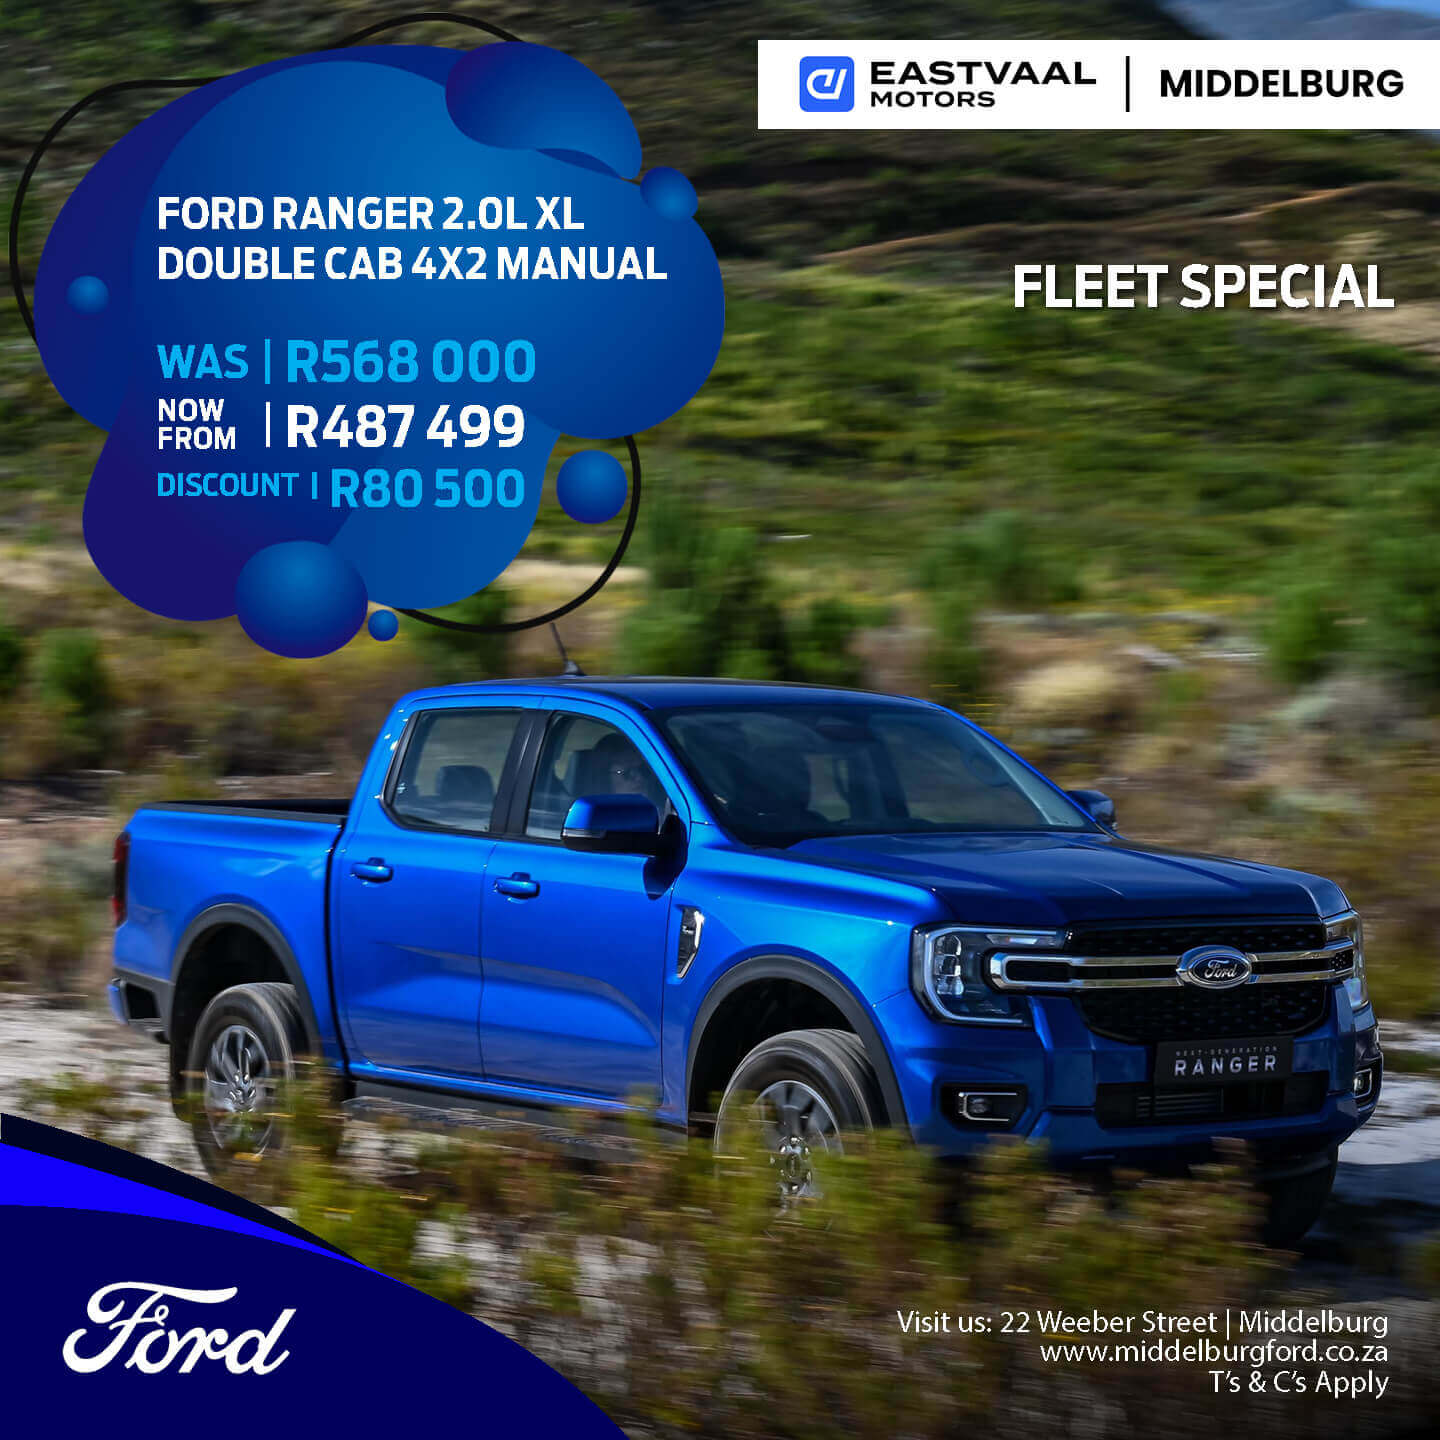 FORD RANGER 2.0L XL image from Eastvaal Motors